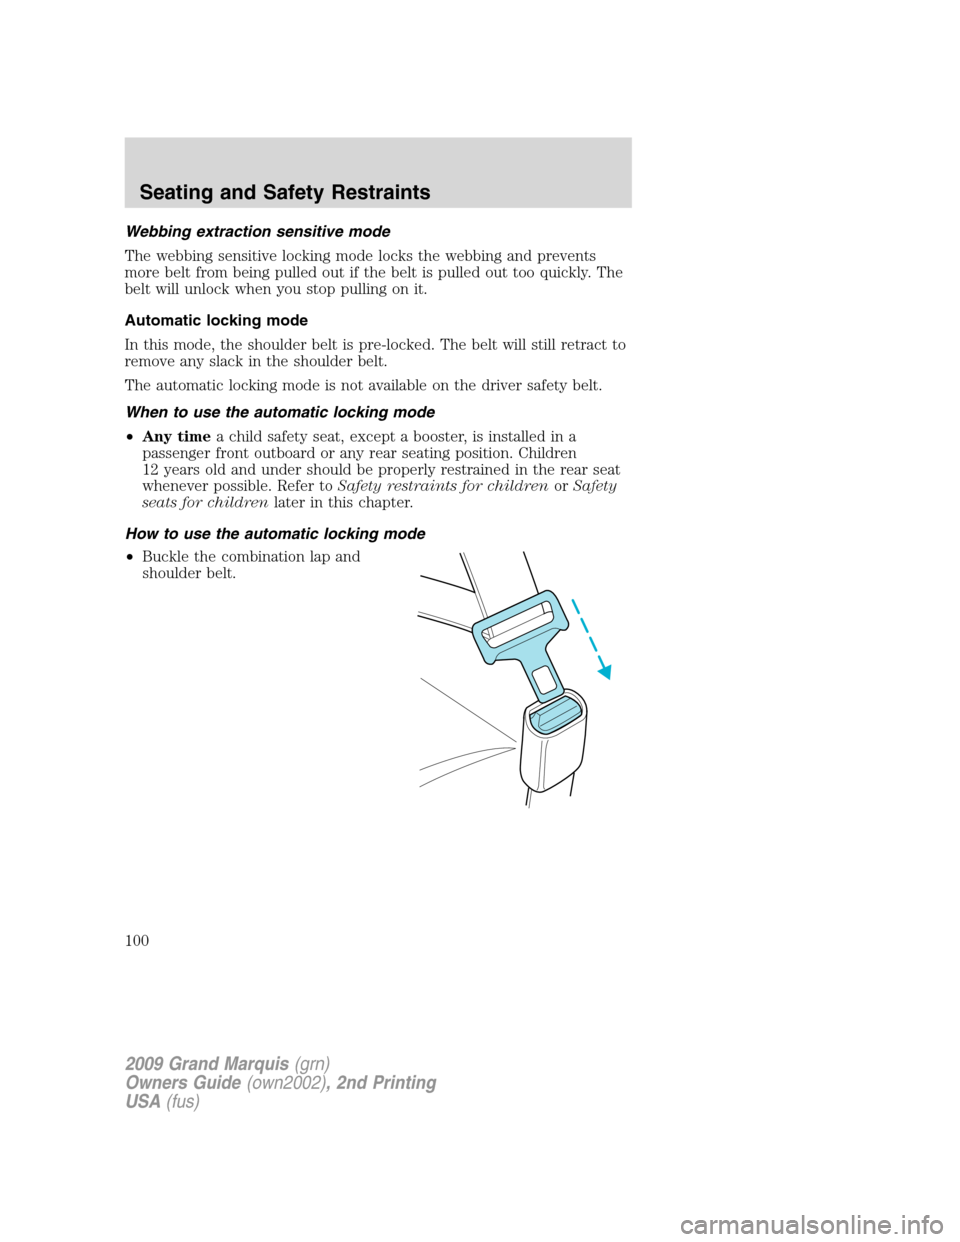 Mercury Grand Marquis 2009  s User Guide Webbing extraction sensitive mode
The webbing sensitive locking mode locks the webbing and prevents
more belt from being pulled out if the belt is pulled out too quickly. The
belt will unlock when you